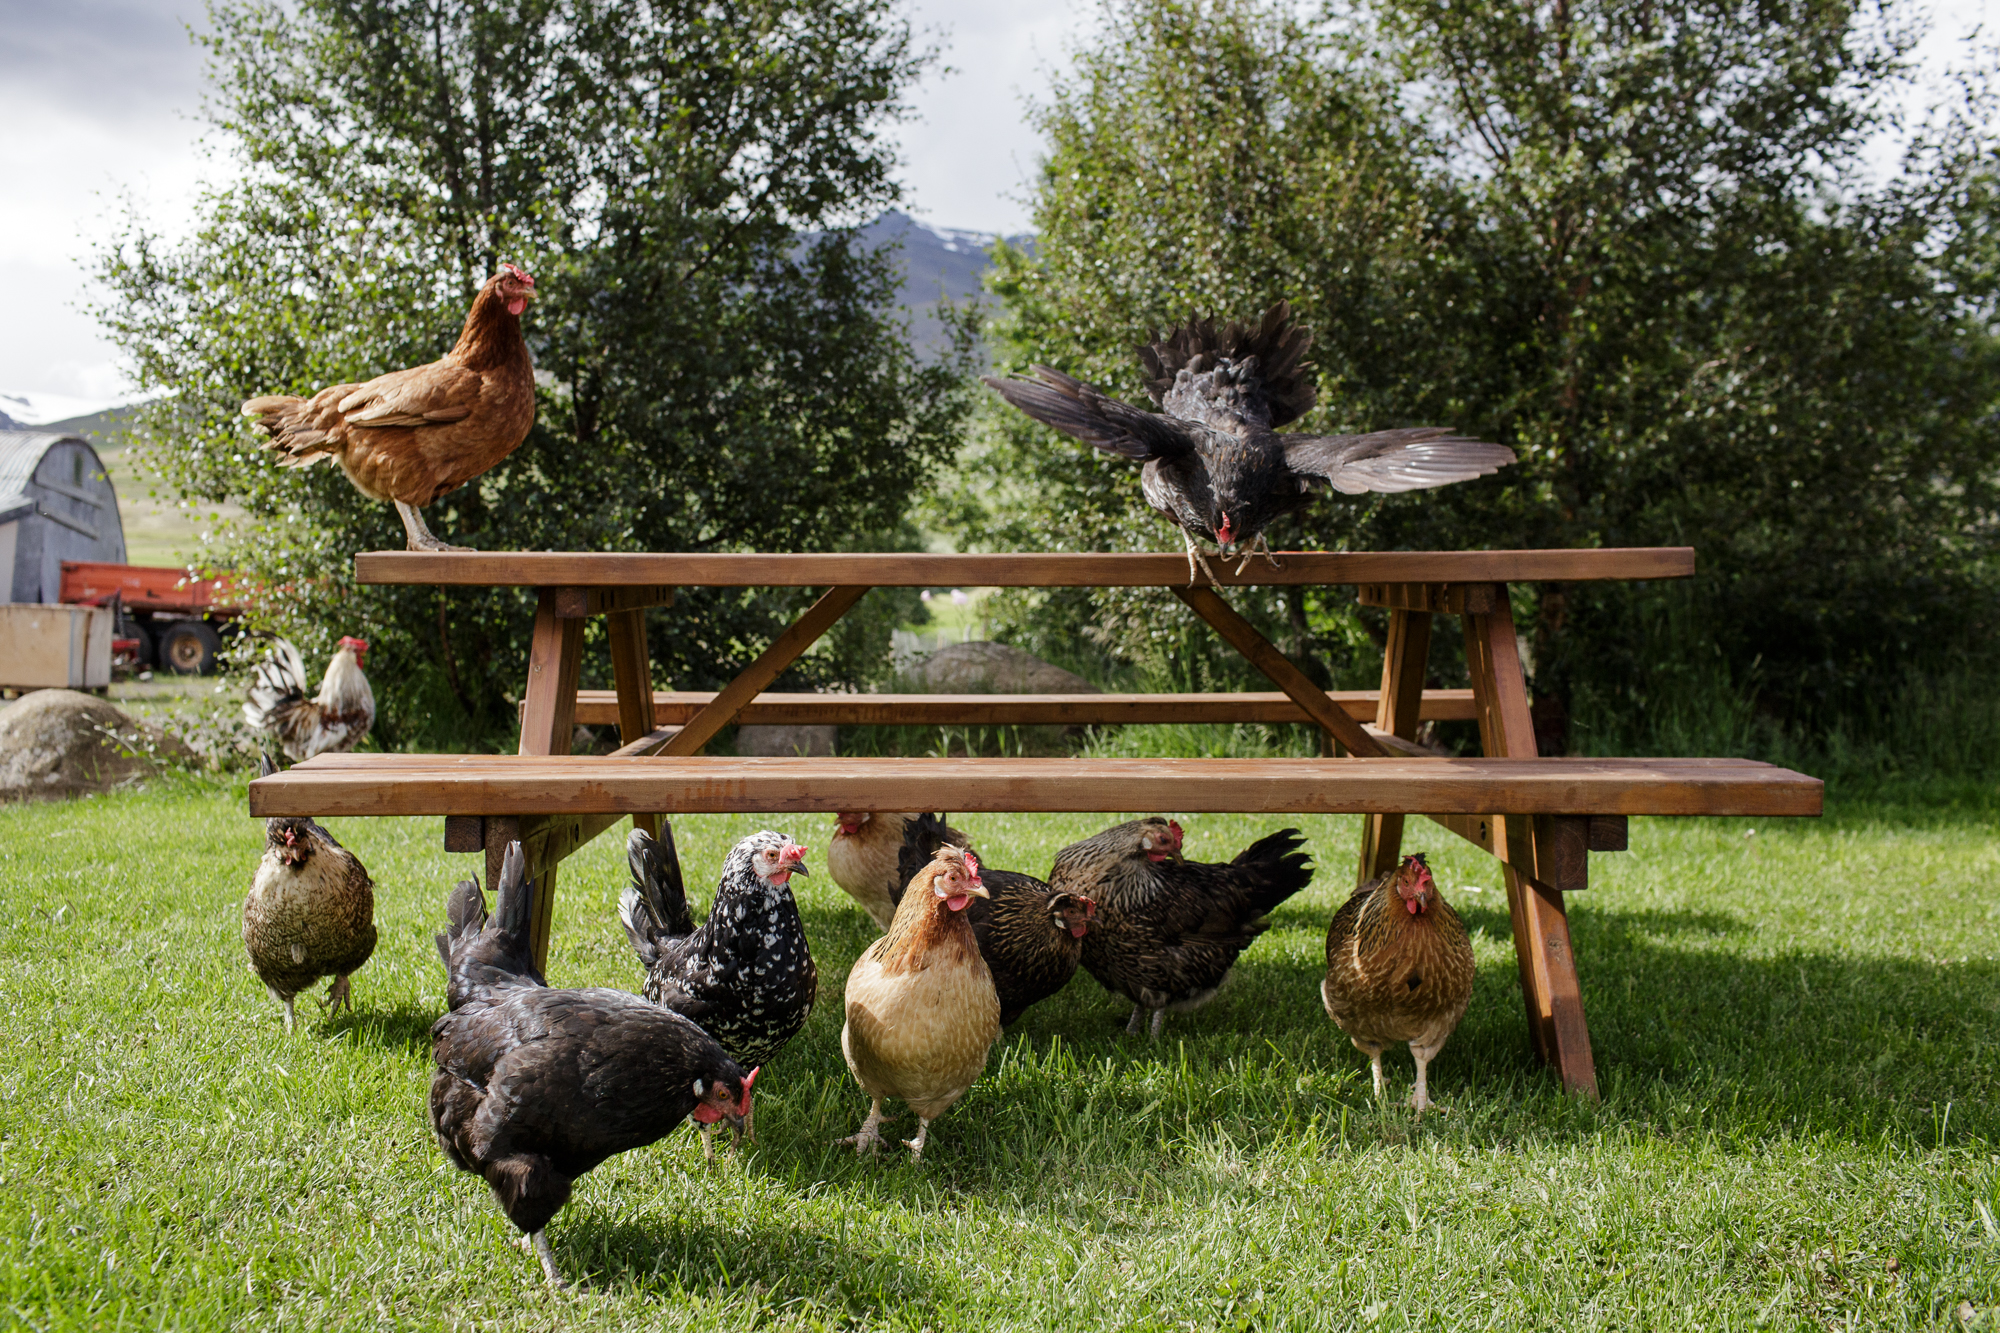  Chickens flock a picnic table outside an ice cream shop in Akureyri.  